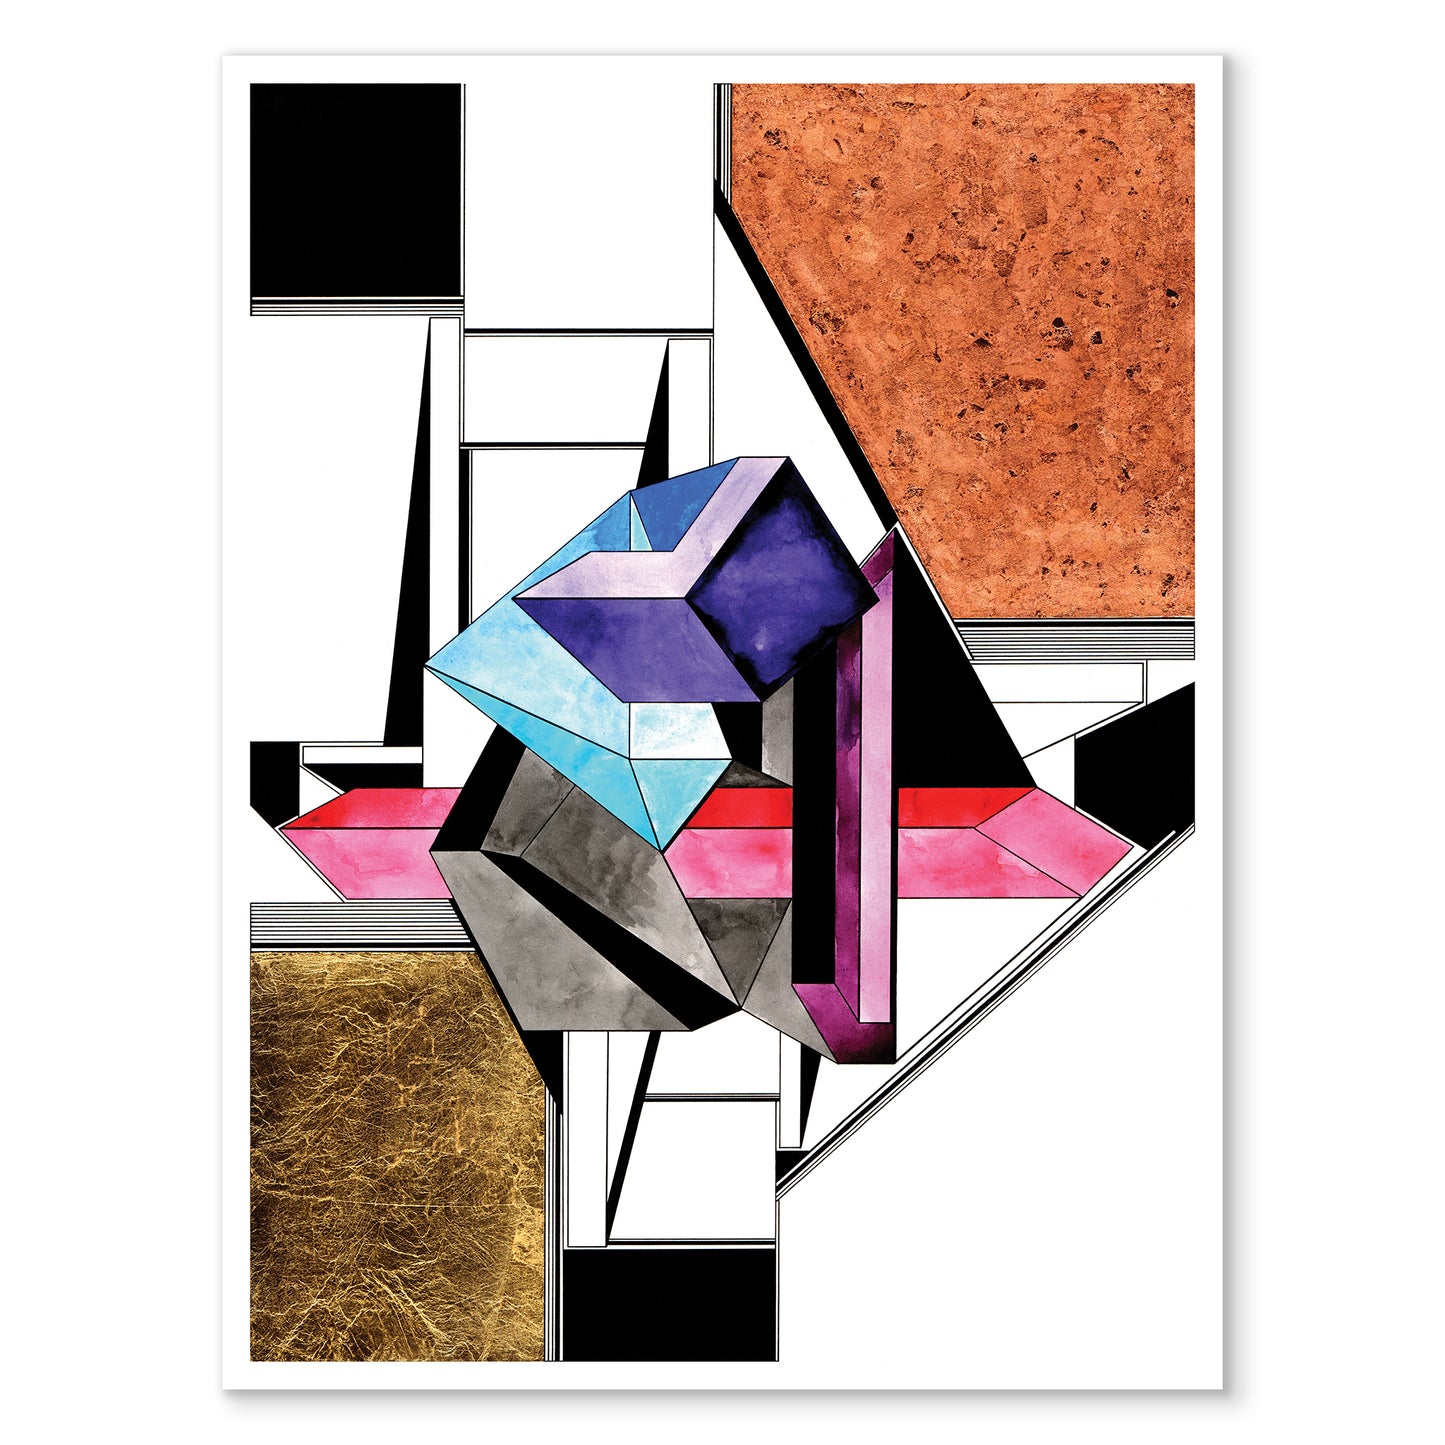 "Geometric Confusion" - Reproduction - Multiple Sizes